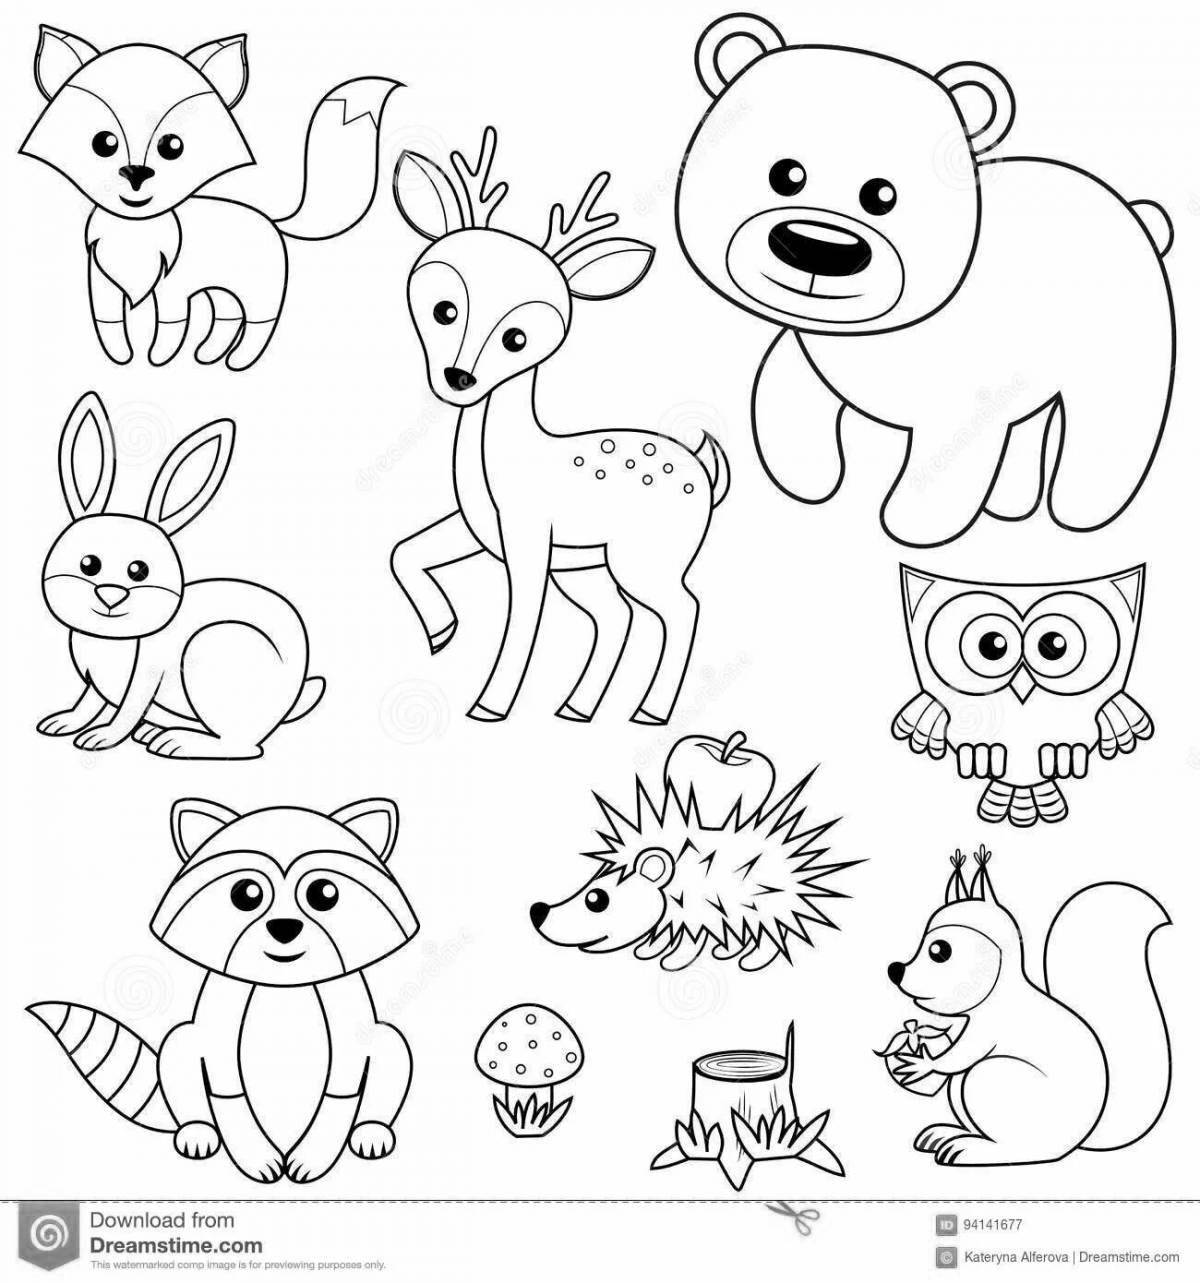 Great forest animal coloring book for 3-4 year olds